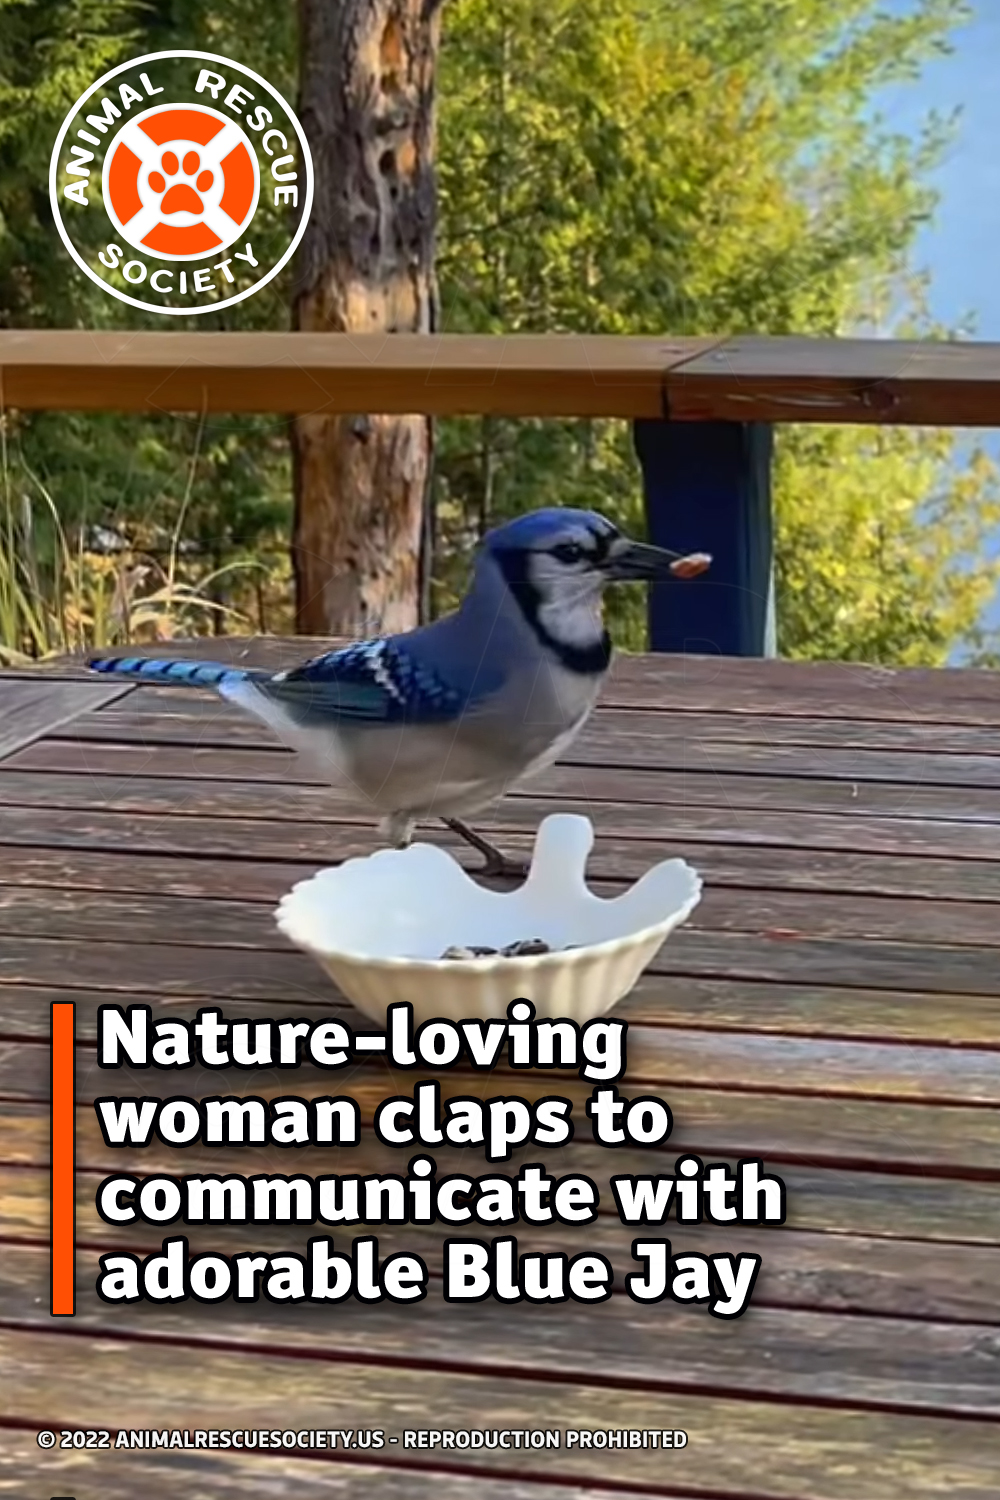 Nature-loving woman claps to communicate with adorable Blue Jay